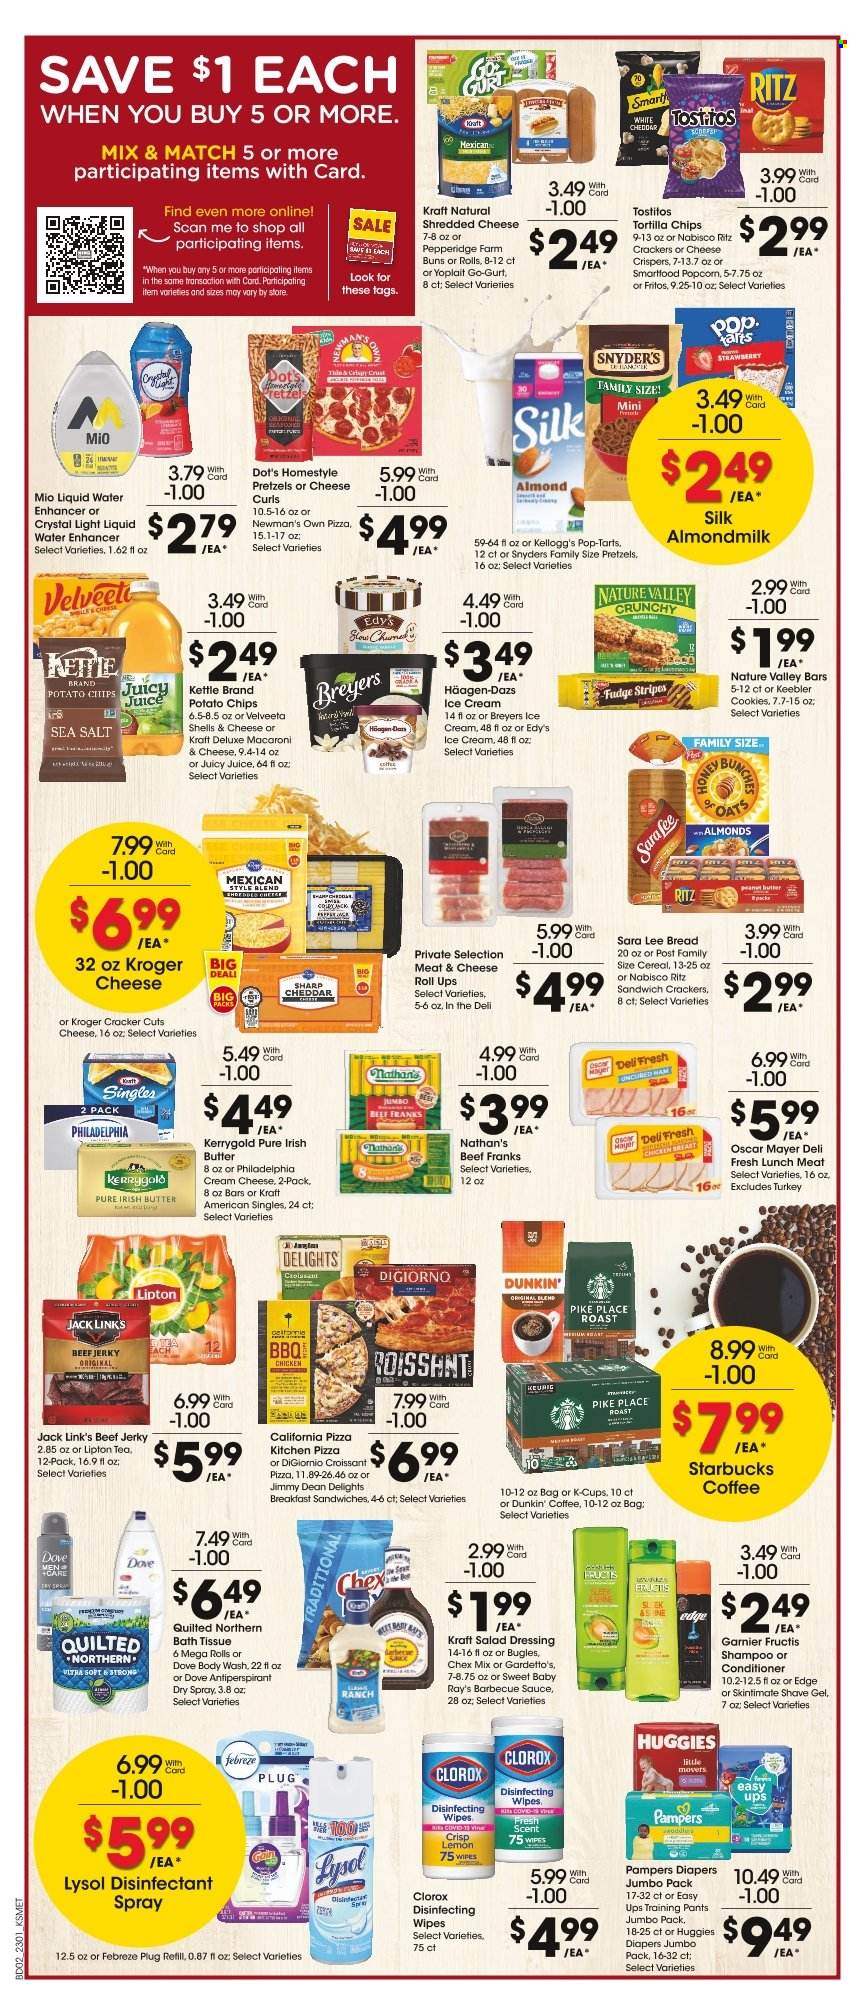 thumbnail - King Soopers Flyer - 02/01/2023 - 02/07/2023 - Sales products - bread, pretzels, buns, Sara Lee, macaroni & cheese, pizza, Kraft®, Jimmy Dean, beef jerky, jerky, Oscar Mayer, lunch meat, cream cheese, shredded cheese, Philadelphia, Kraft Singles, Yoplait, almond milk, irish butter, ice cream, Häagen-Dazs, cookies, Dove, fudge, crackers, Kellogg's, Pop-Tarts, Keebler, RITZ, Fritos, tortilla chips, potato chips, chips, Smartfood, popcorn, cheese rolls, Tostitos, Jack Link's, Chex Mix, cereals, Nature Valley, BBQ sauce, salad dressing, dressing, peanut butter, juice, Lipton, tea, Starbucks, coffee capsules, K-Cups, chicken breasts, wipes, Huggies, Pampers, pants, nappies, baby pants, bath tissue, Quilted Northern, Febreze, Gain, desinfection, Lysol, Clorox, body wash, shampoo, Garnier, conditioner, Fructis, anti-perspirant, shave gel, antibacterial spray. Page 2.